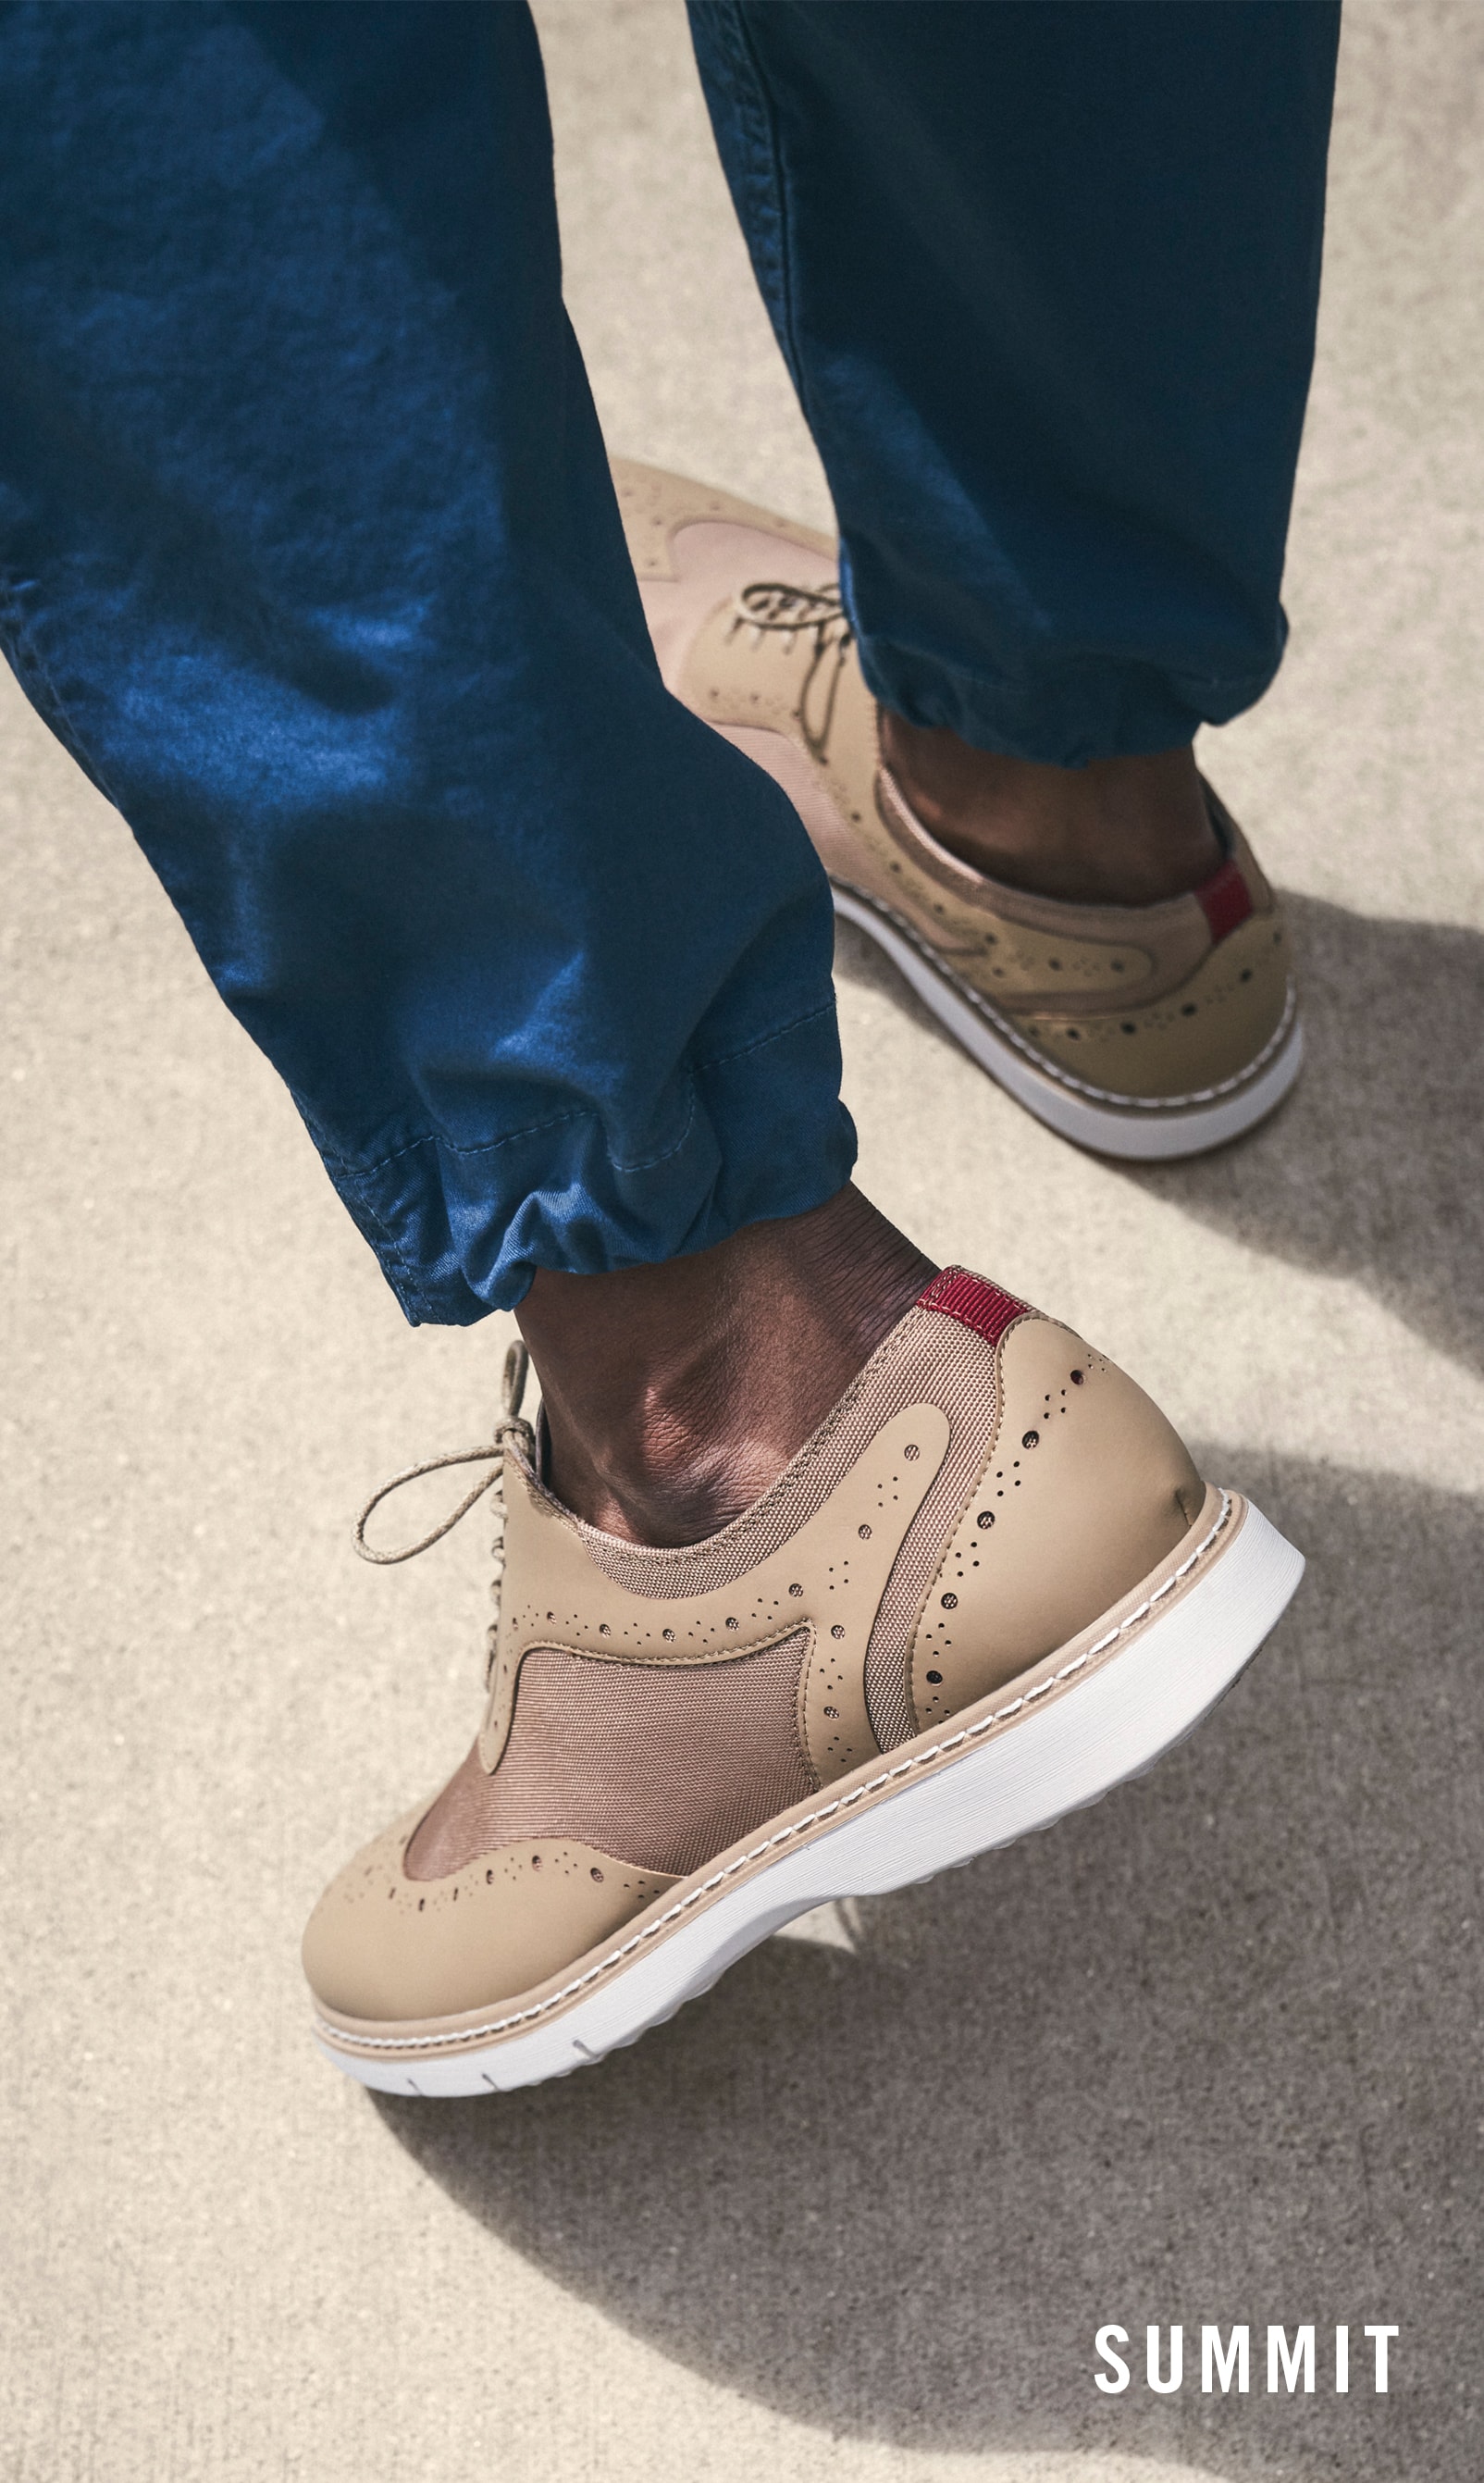 Men's Wingtips category. The featured product is the Summit Wingtip Lace Up in Khaki.